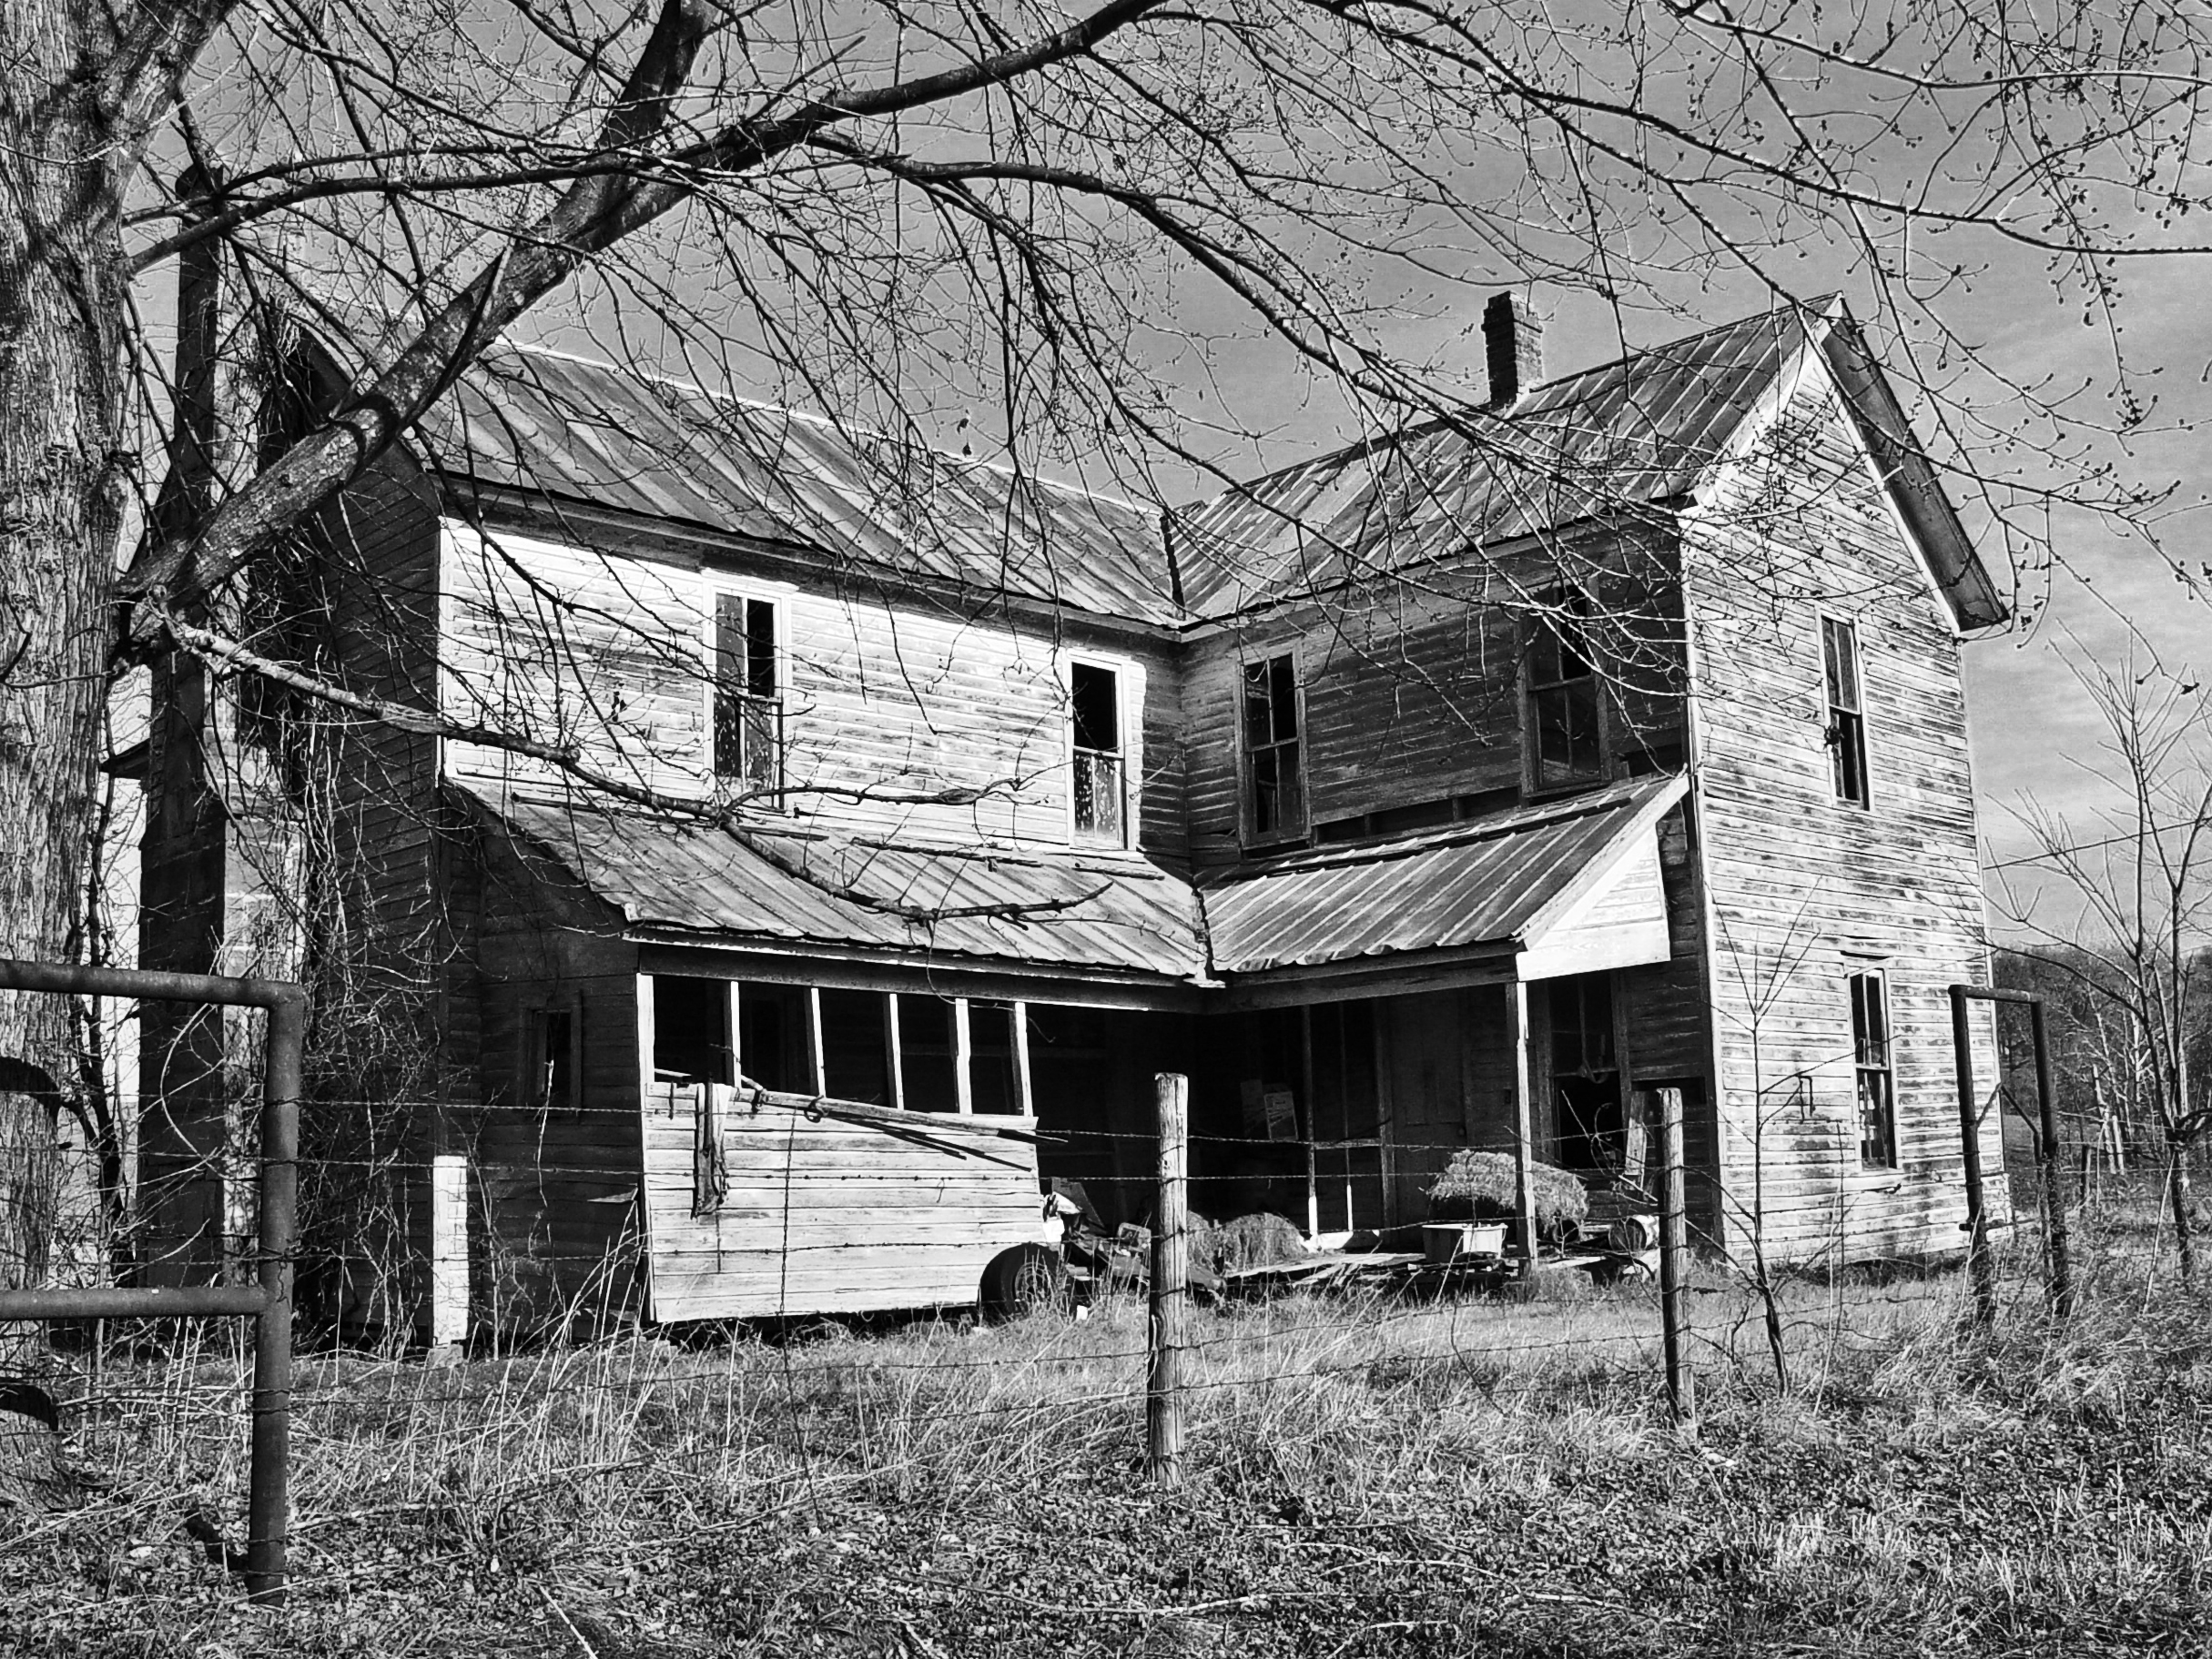    Back Porch of an&nbsp;Abandoned Farmhouse  , Madison County, AR, 2006. B&amp;W HDR digital image. 